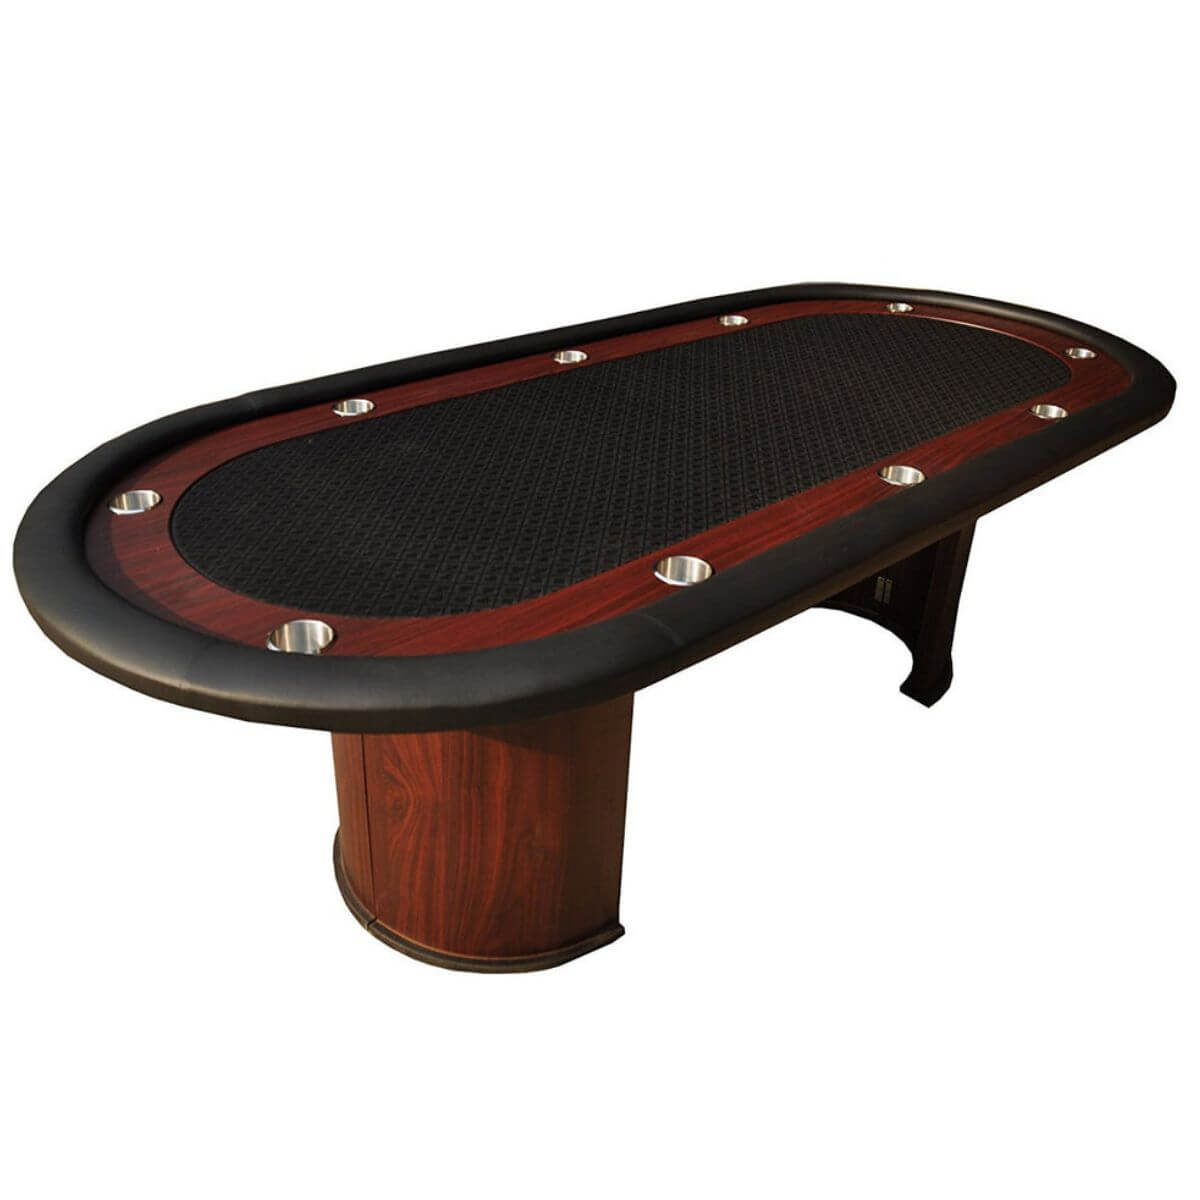 96 Luna Poker Table with Cup Holders Racetrack Black Speed Cloth